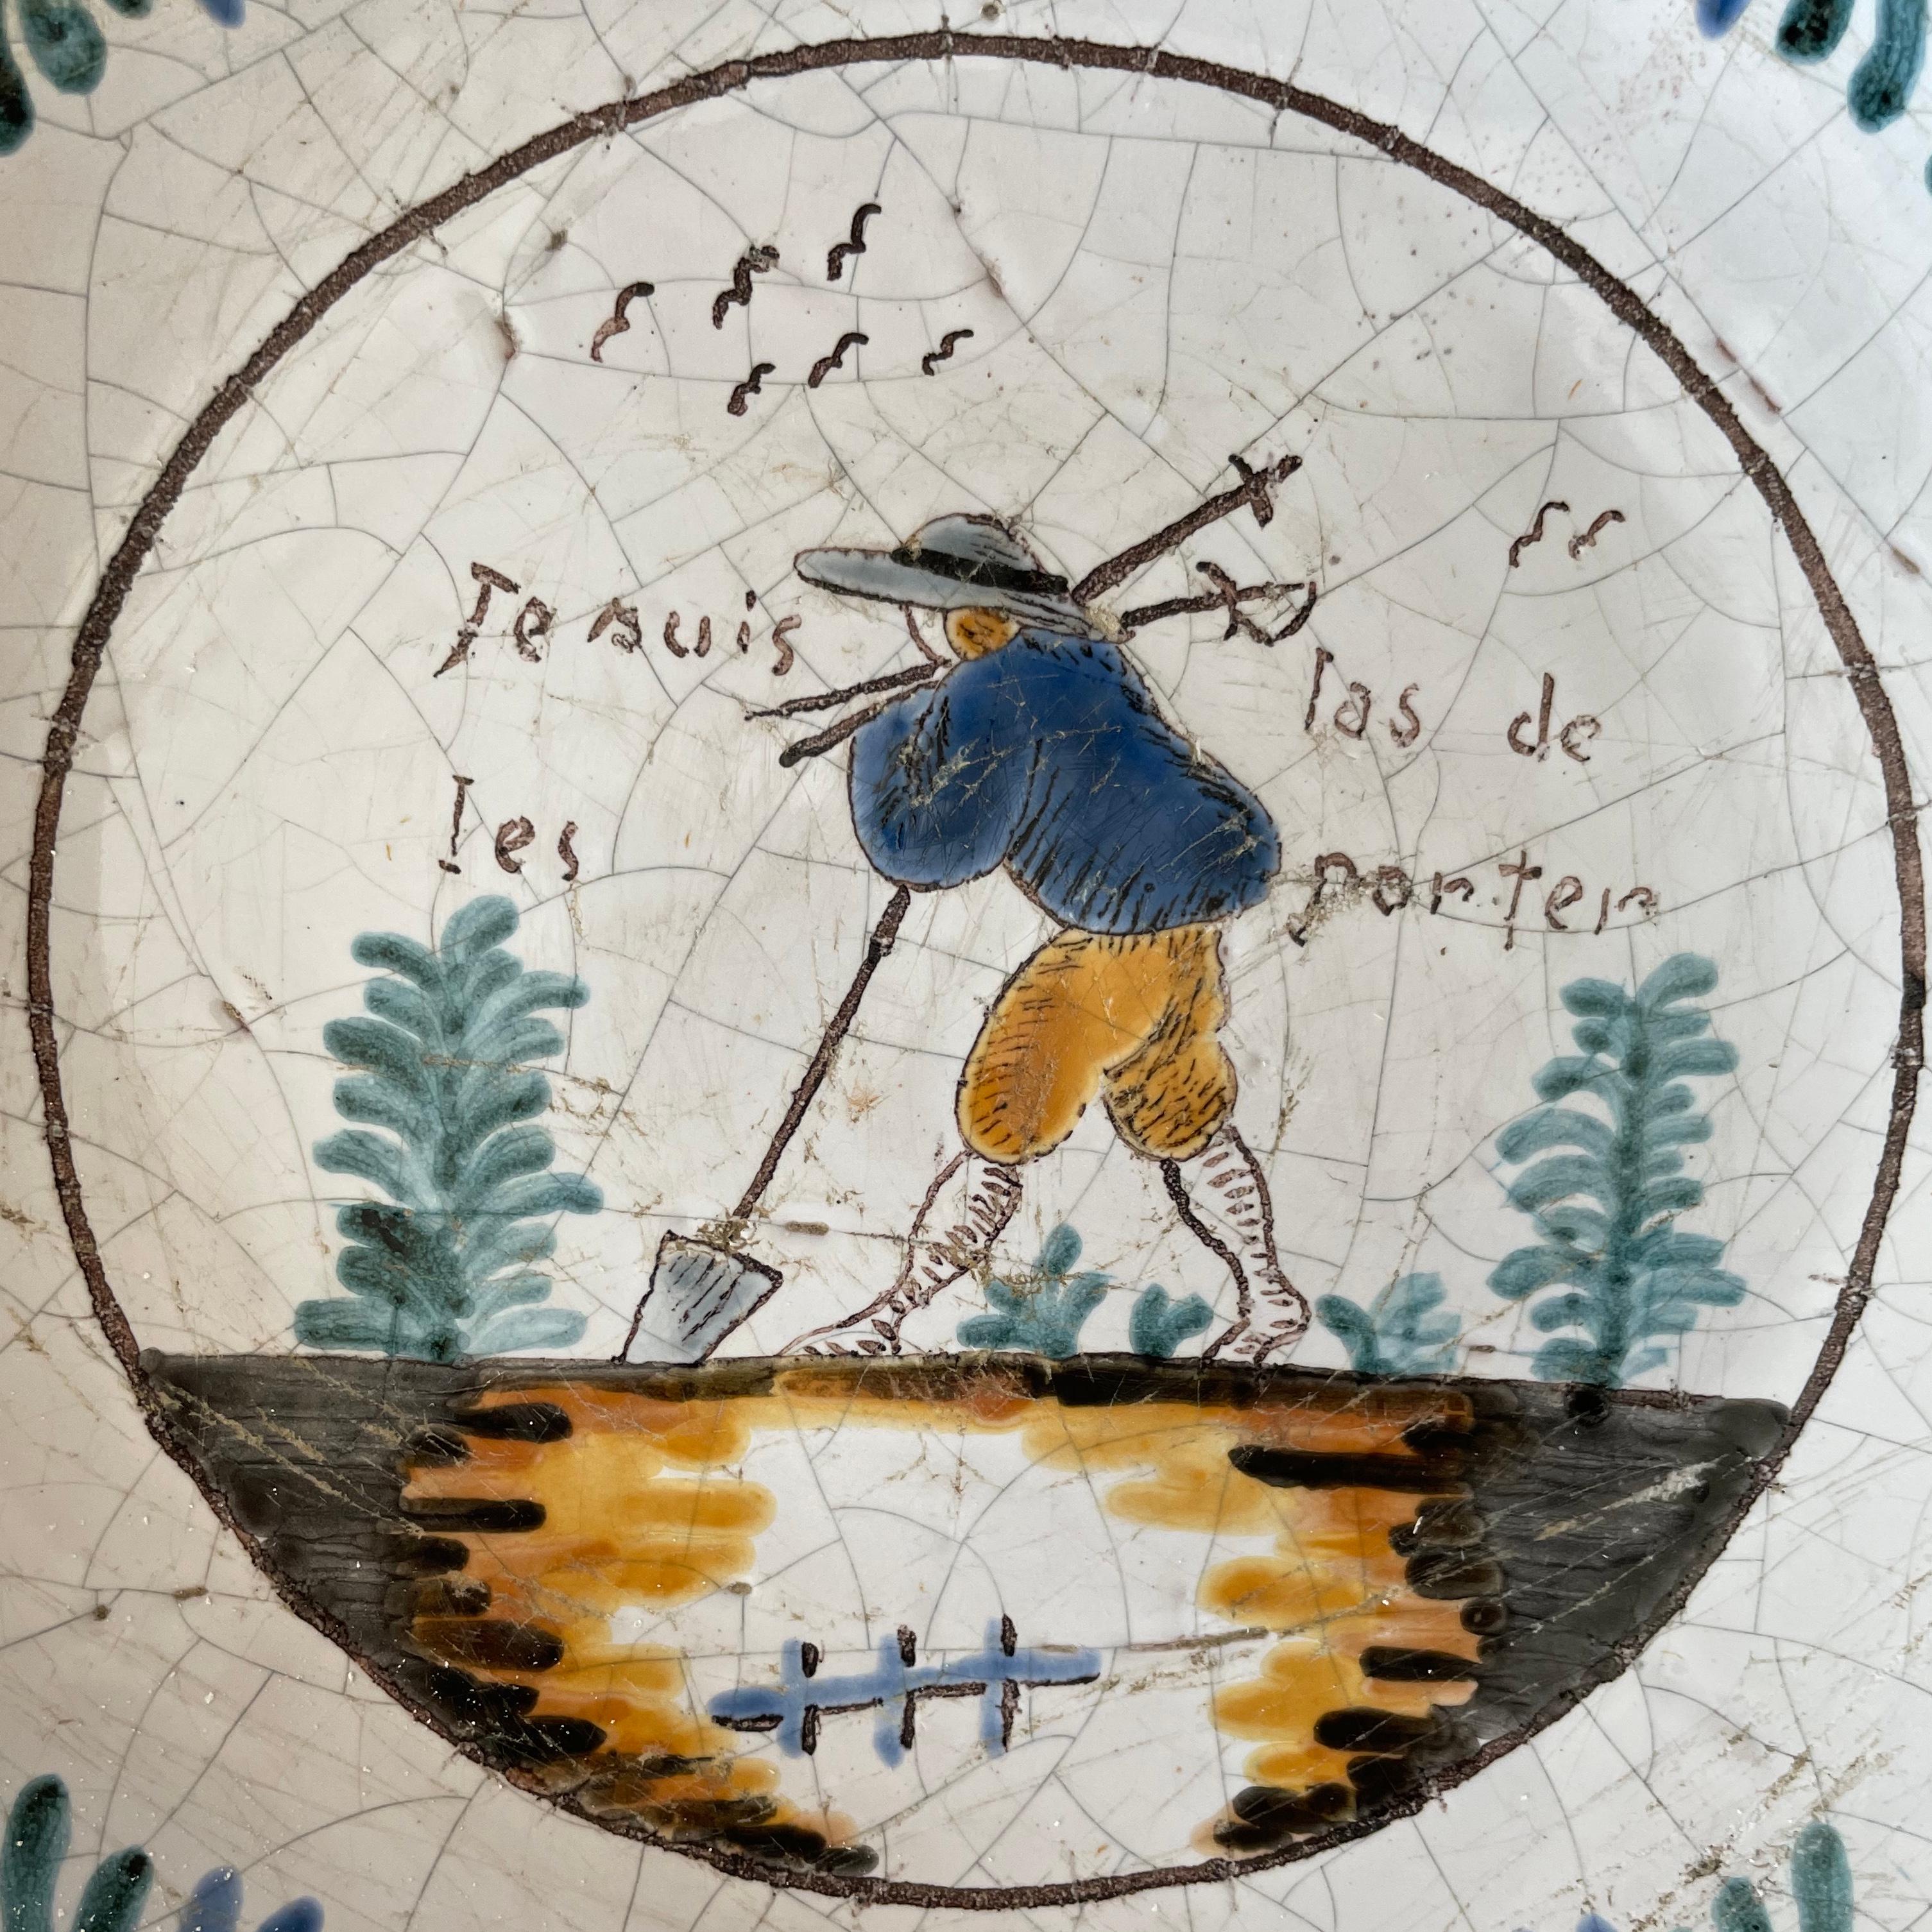 Quimper French blue and white plate. Early 19th century faience / terracotta/pottery hand painted plate with blue and yellow decoration centering on labourer in field with tools. “Je suis las de les porter,” meaning I’m done with these things. Great